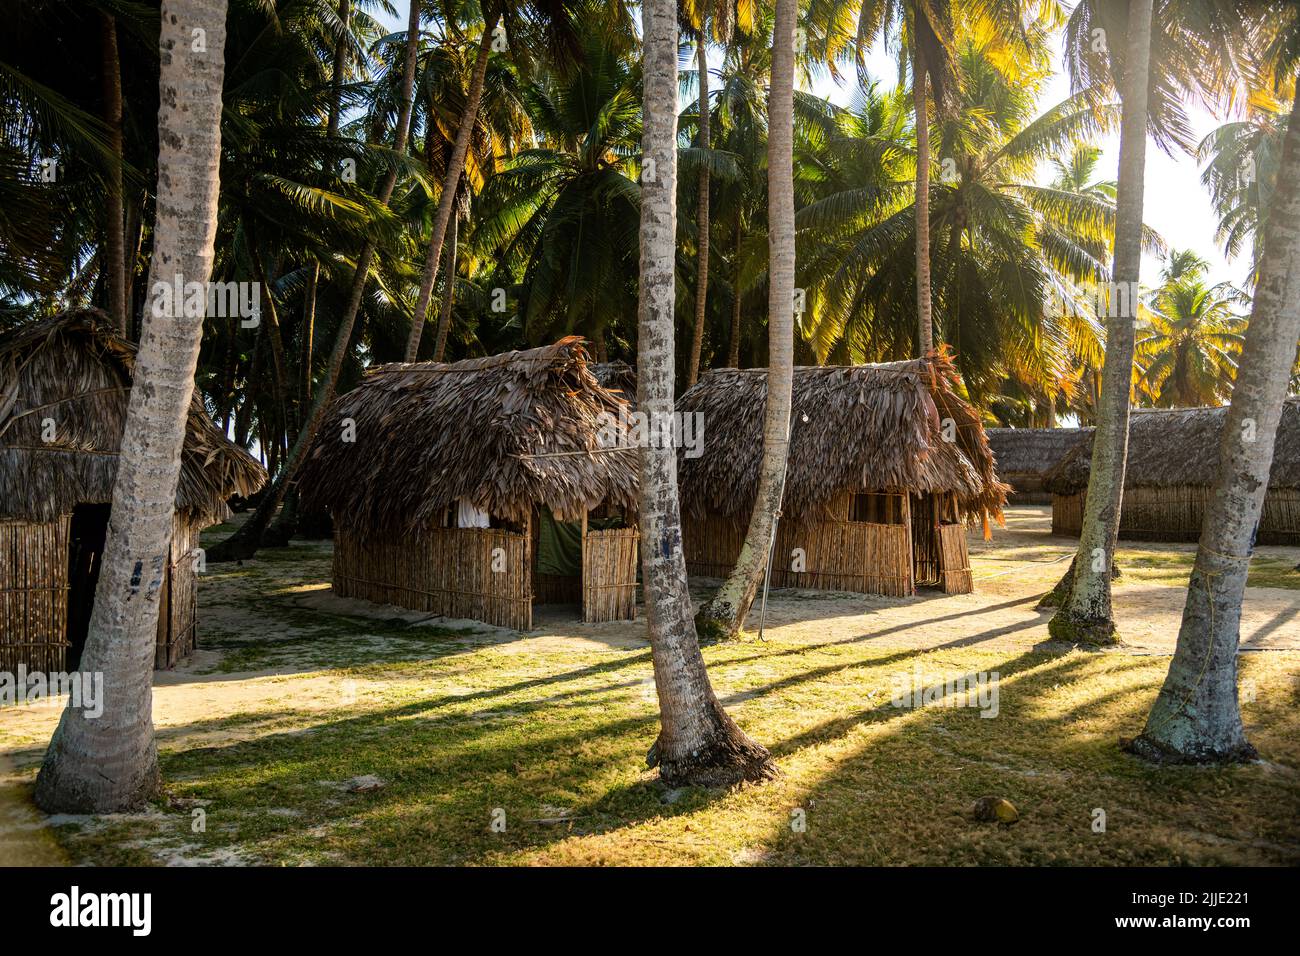 Accommodation huts on an island in the San Blas Islands in Panama Stock Photo